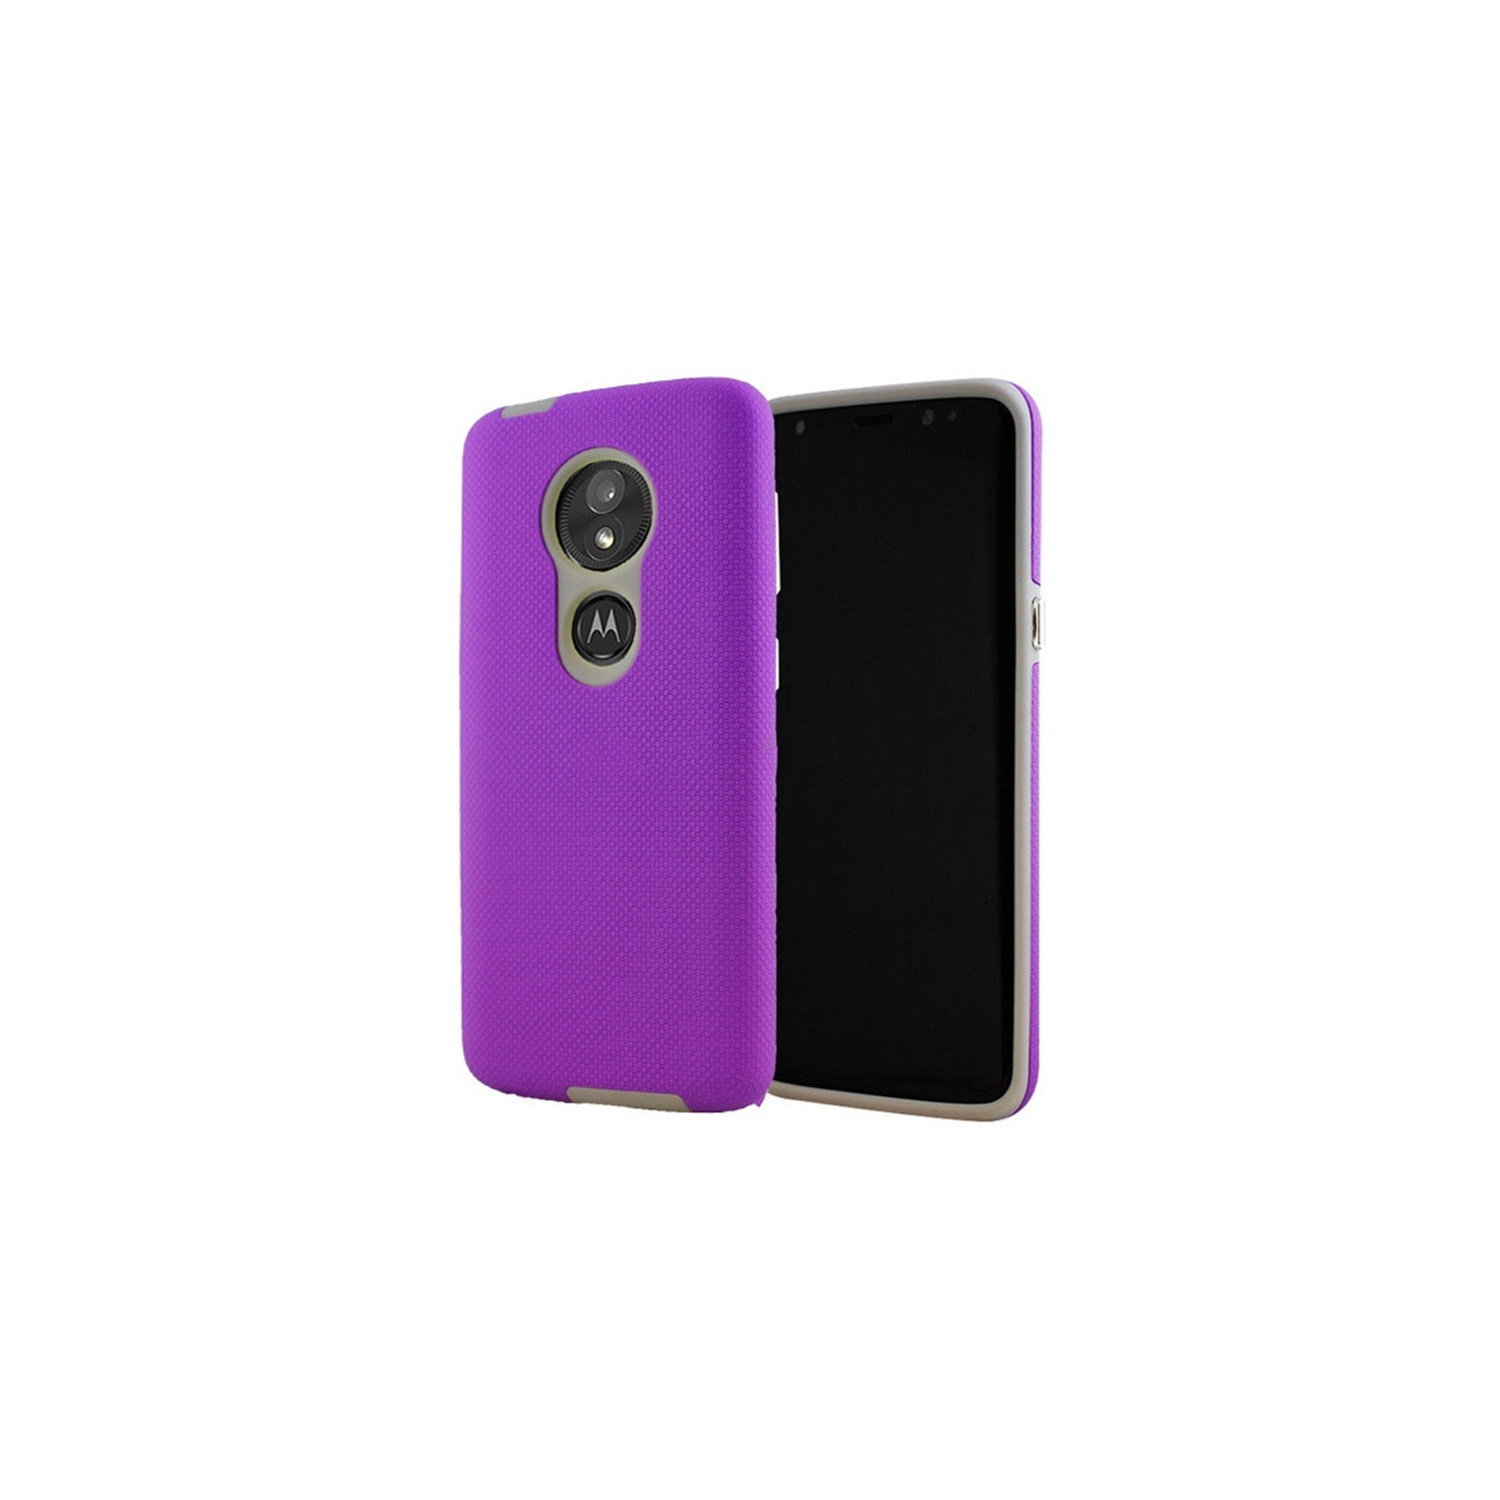 【CSmart】 Slim Fitted Hybrid Hard PC Shell Shockproof Scratch Resistant Case Cover for Motorola Moto G7 Power, Purple